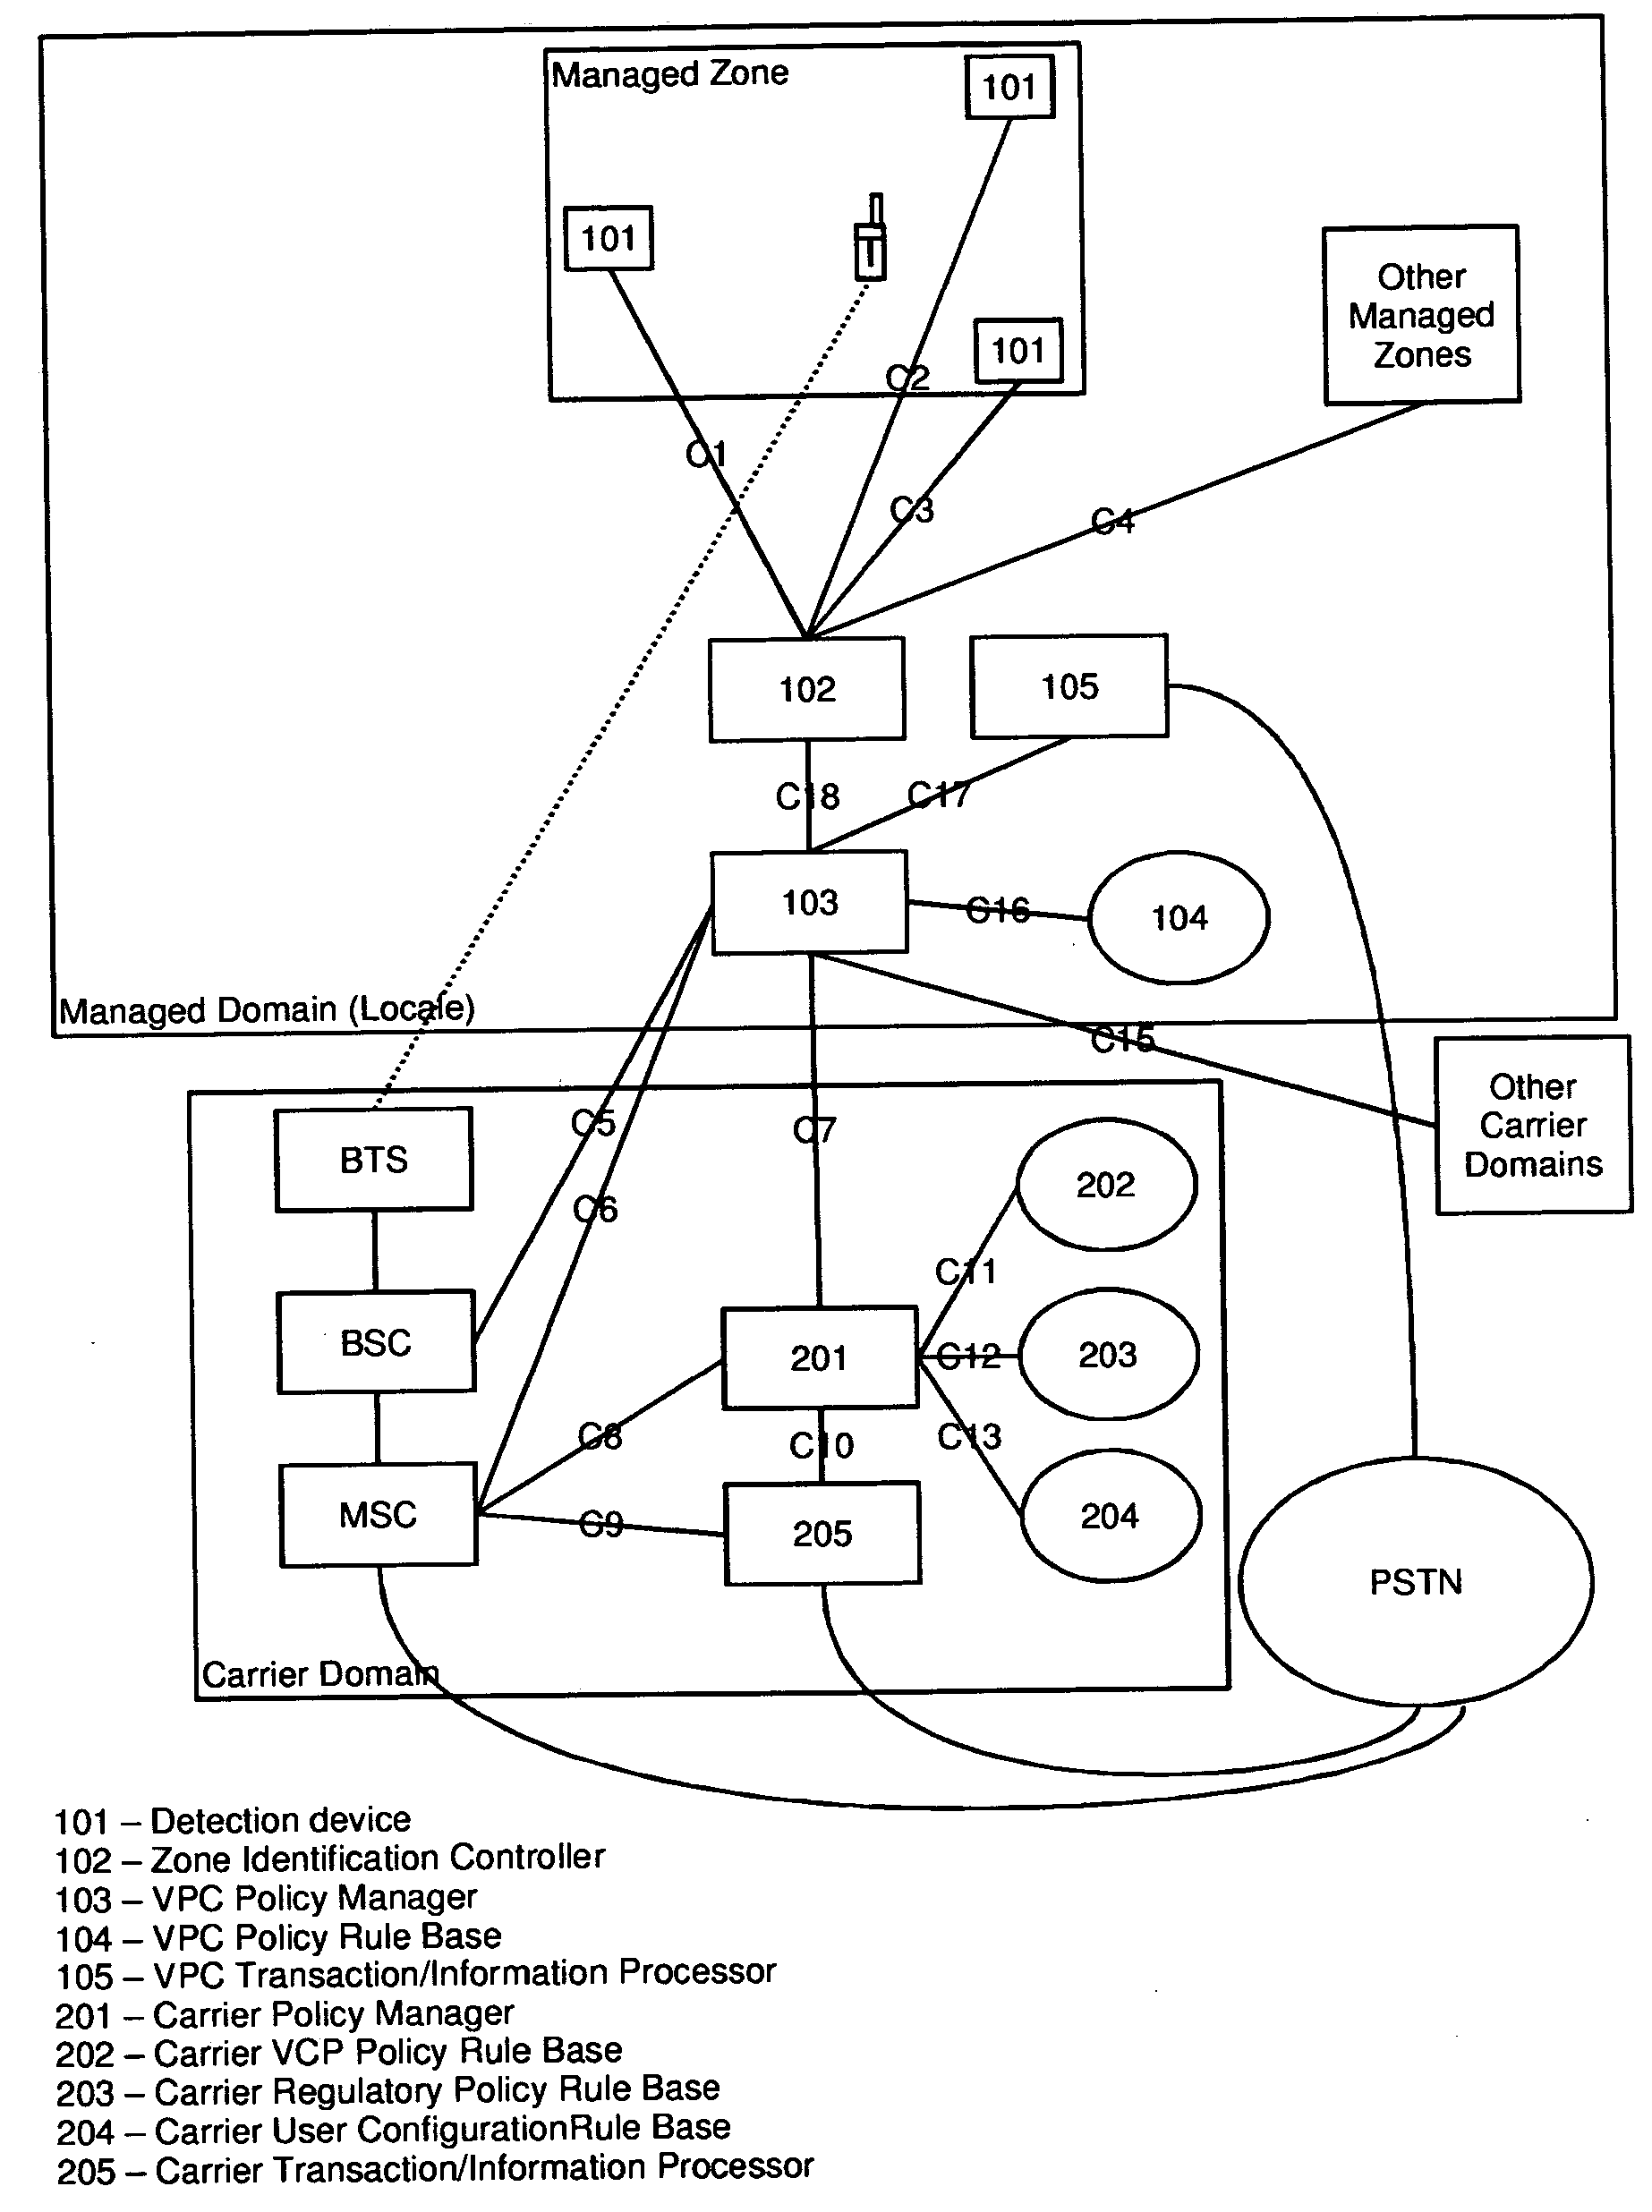 System and apparatus for managing access to wireless communication devices while present within a specified physical area